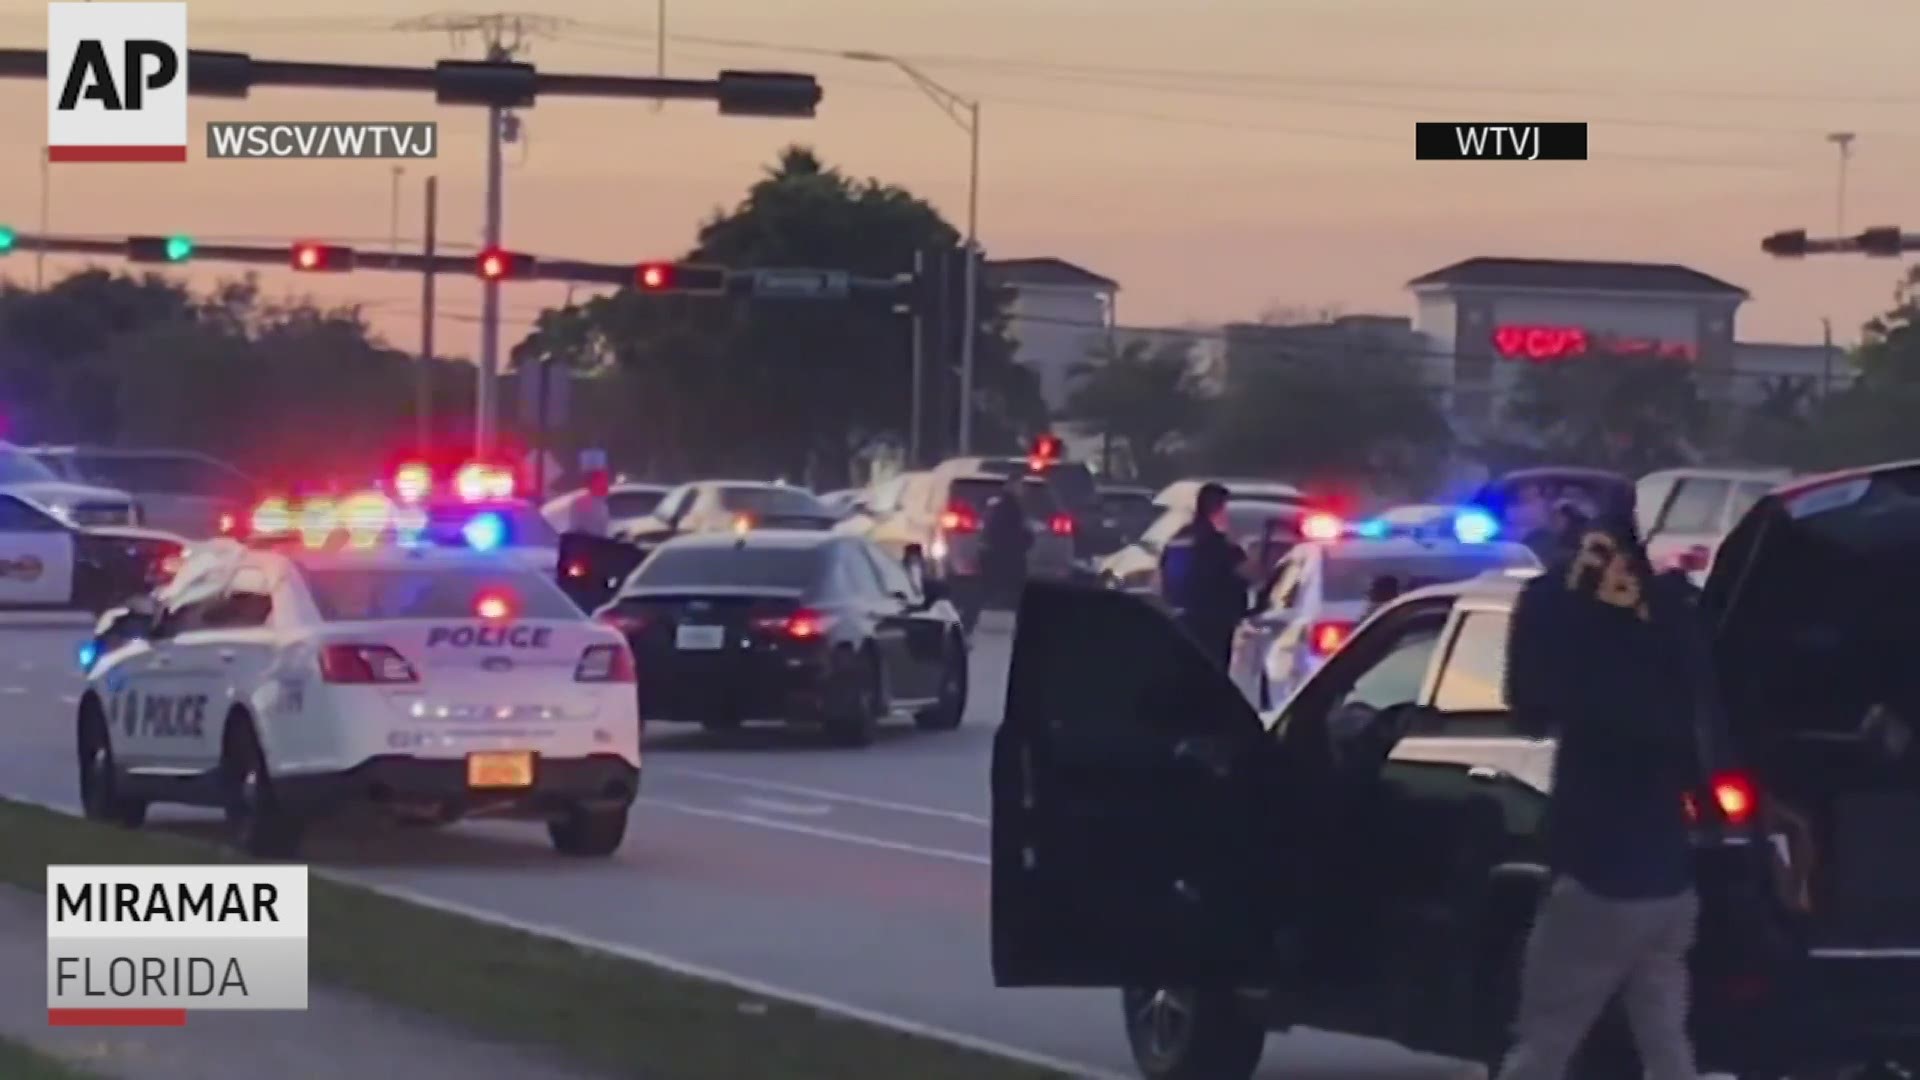 A WCSV/WTVJ photographer captured the moments that a fatal shootout began in Miami between police and armed robbers.